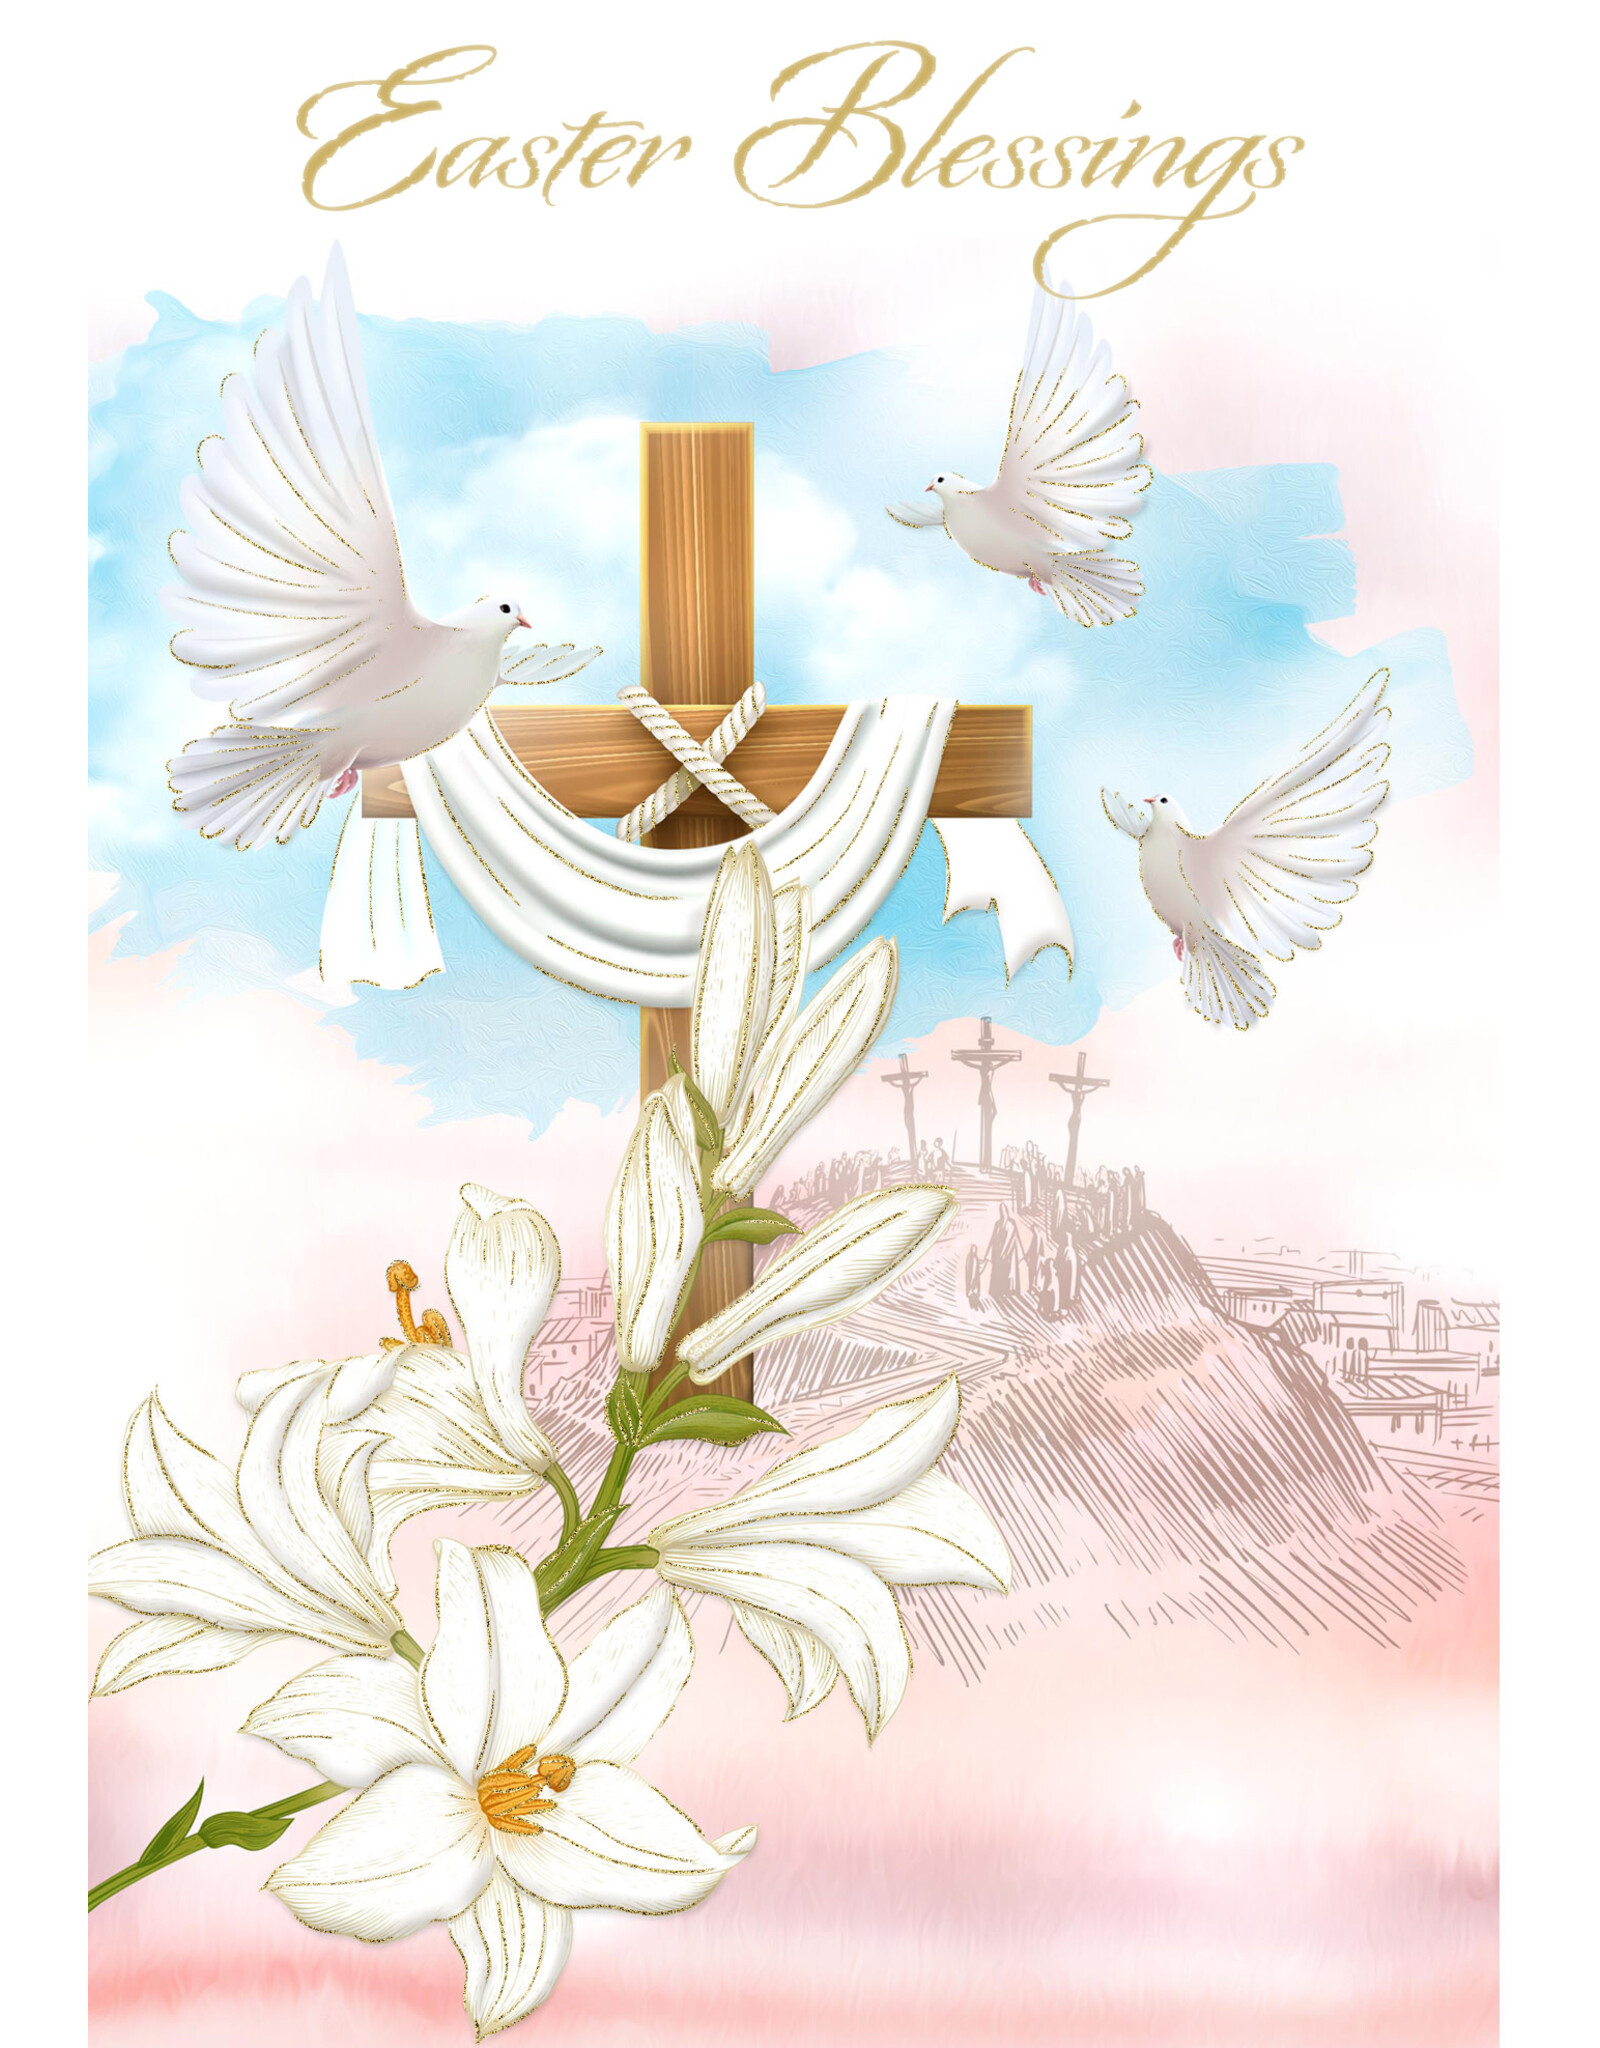 Greetings of Faith Card - Easter, Doves with Cross